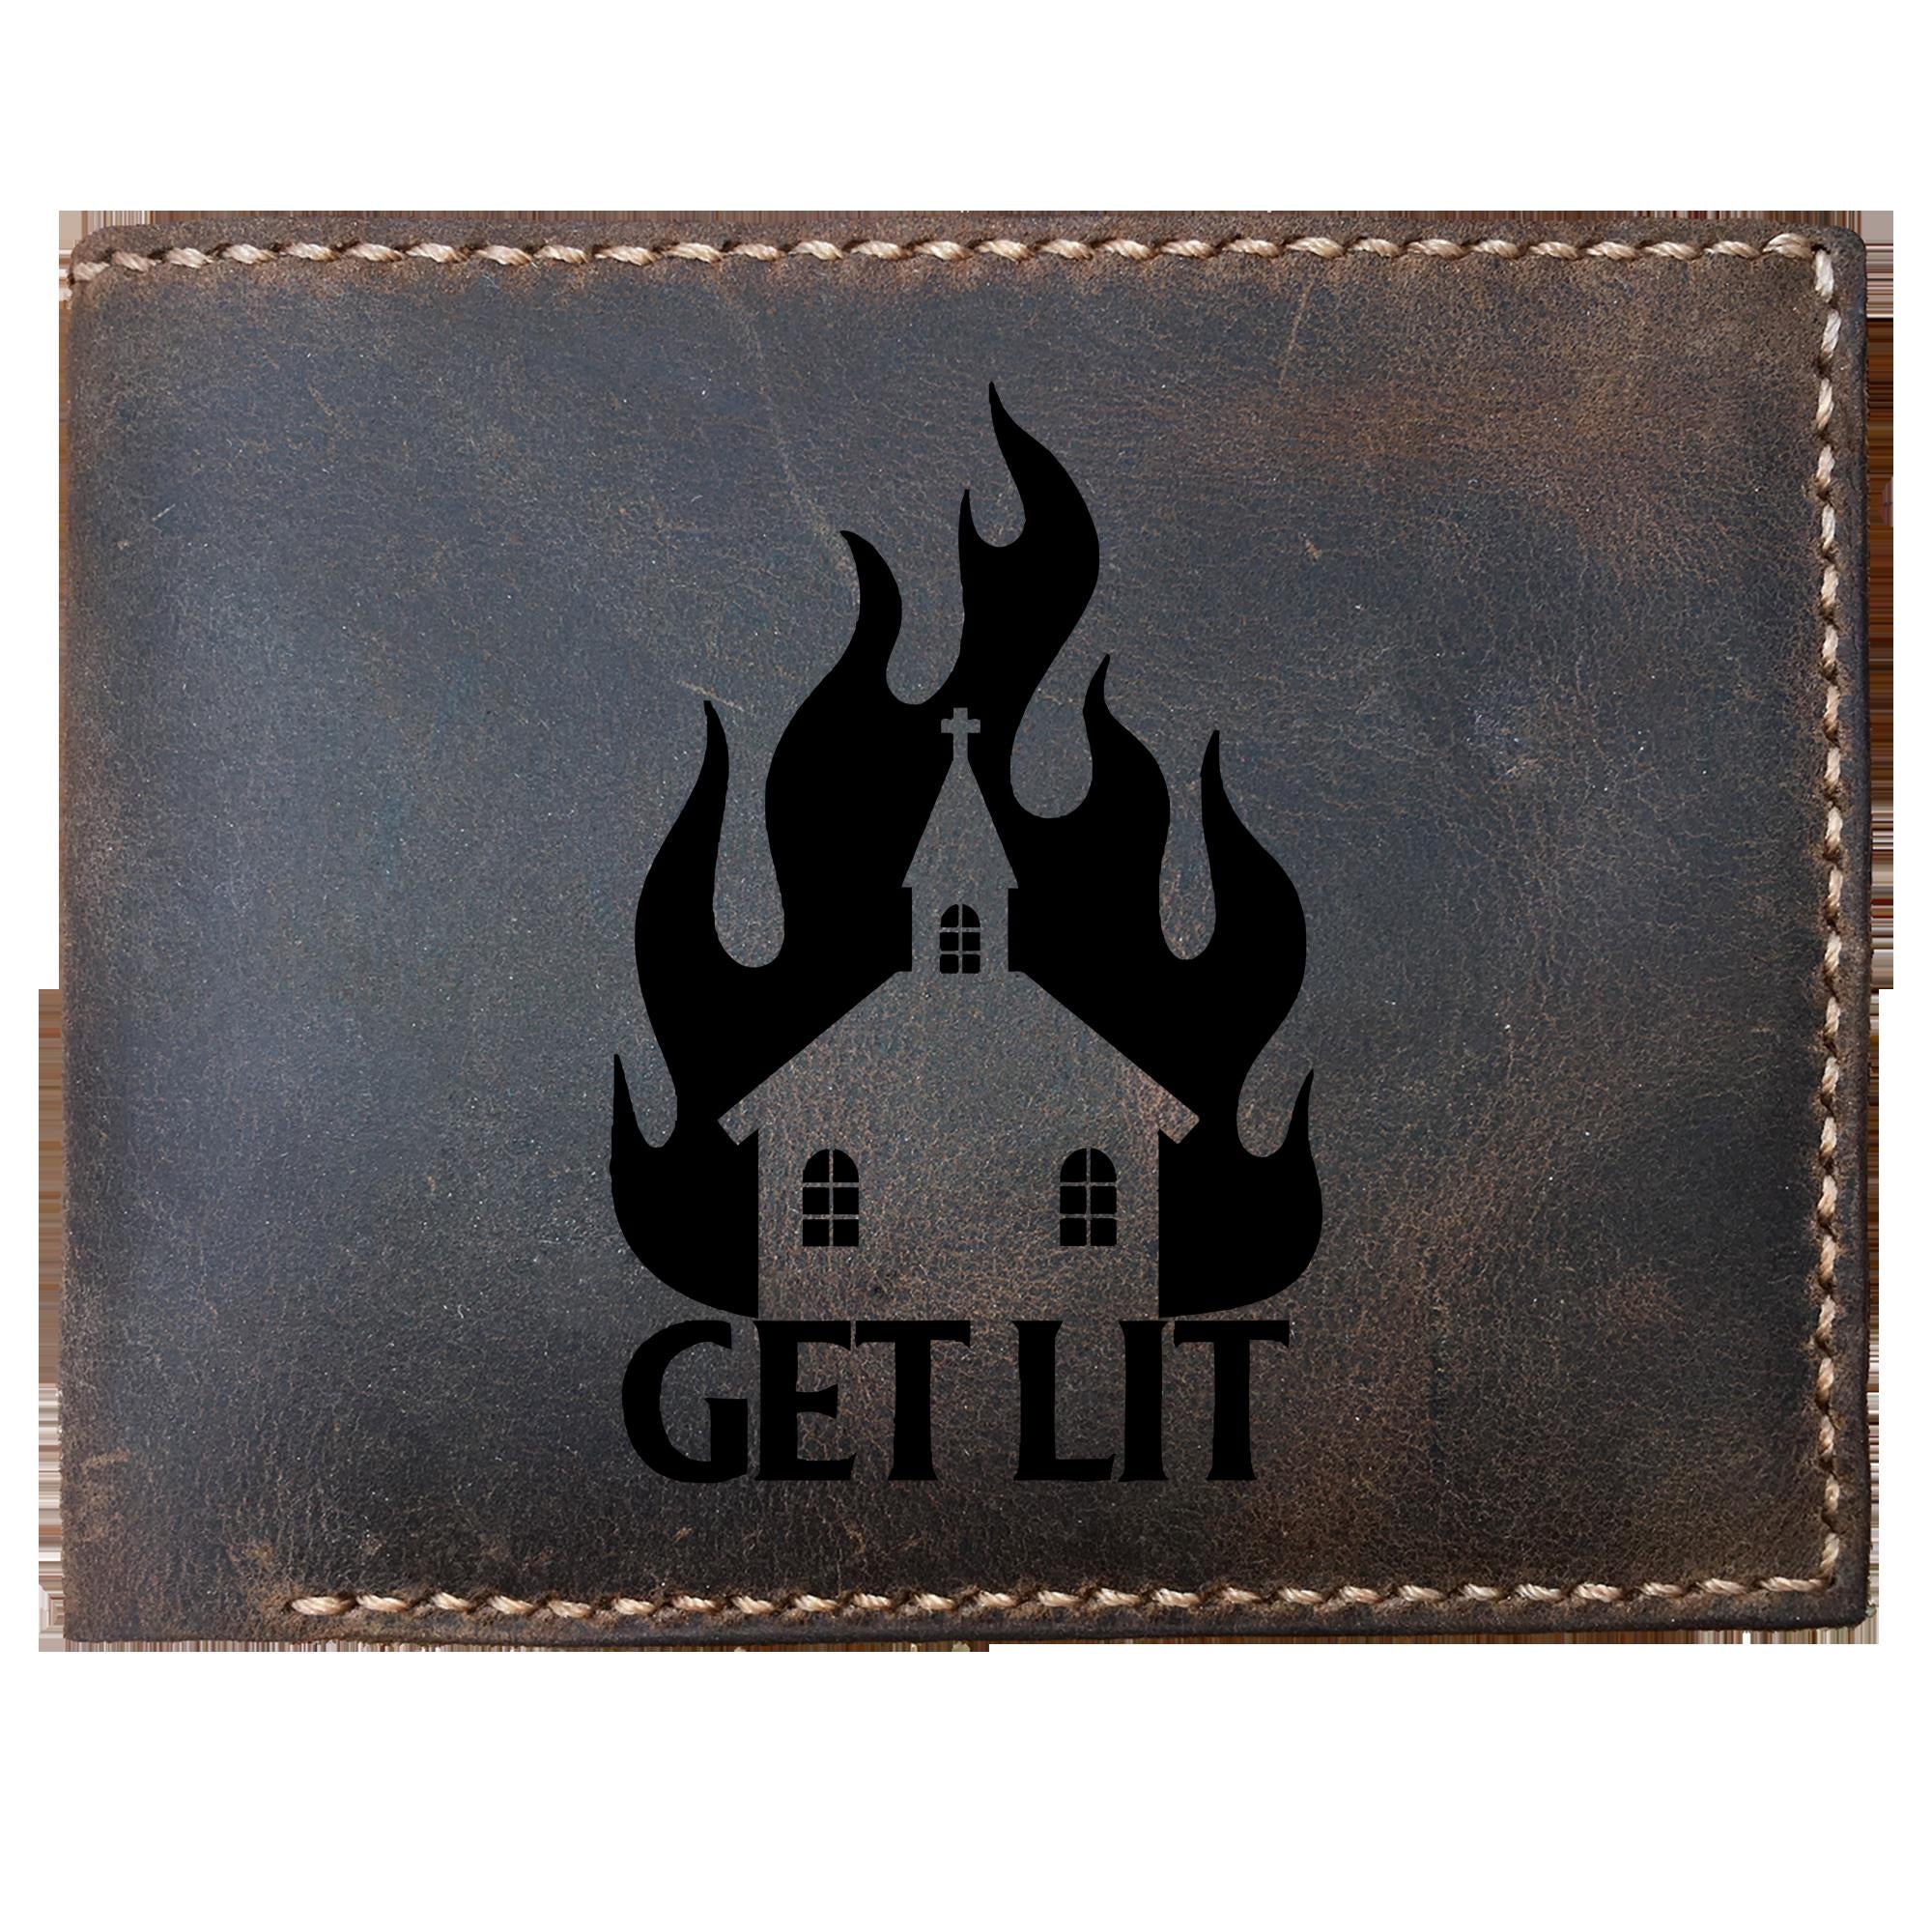 Skitongifts Funny Custom Laser Engraved Bifold Leather Wallet For Men, Get Lit Stay Lit Burning Church Antireligion Satan Worshipers